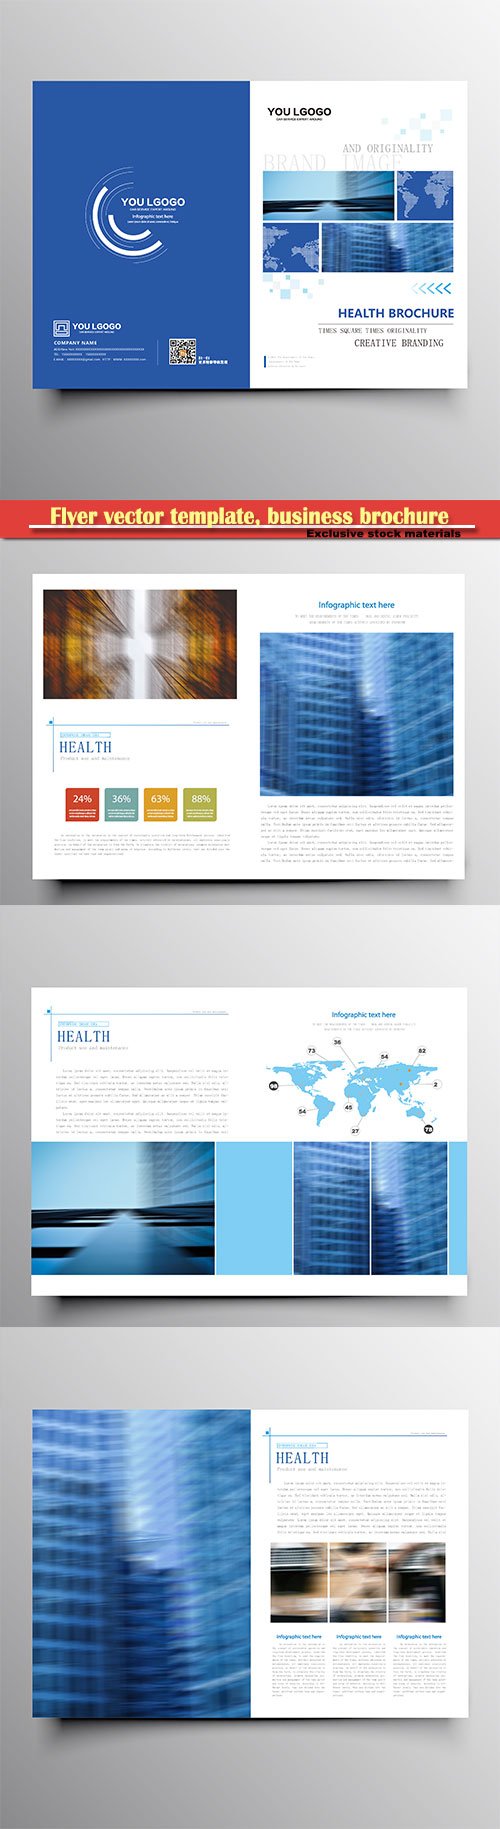 Flyer vector template, business brochure, magazine cover # 33